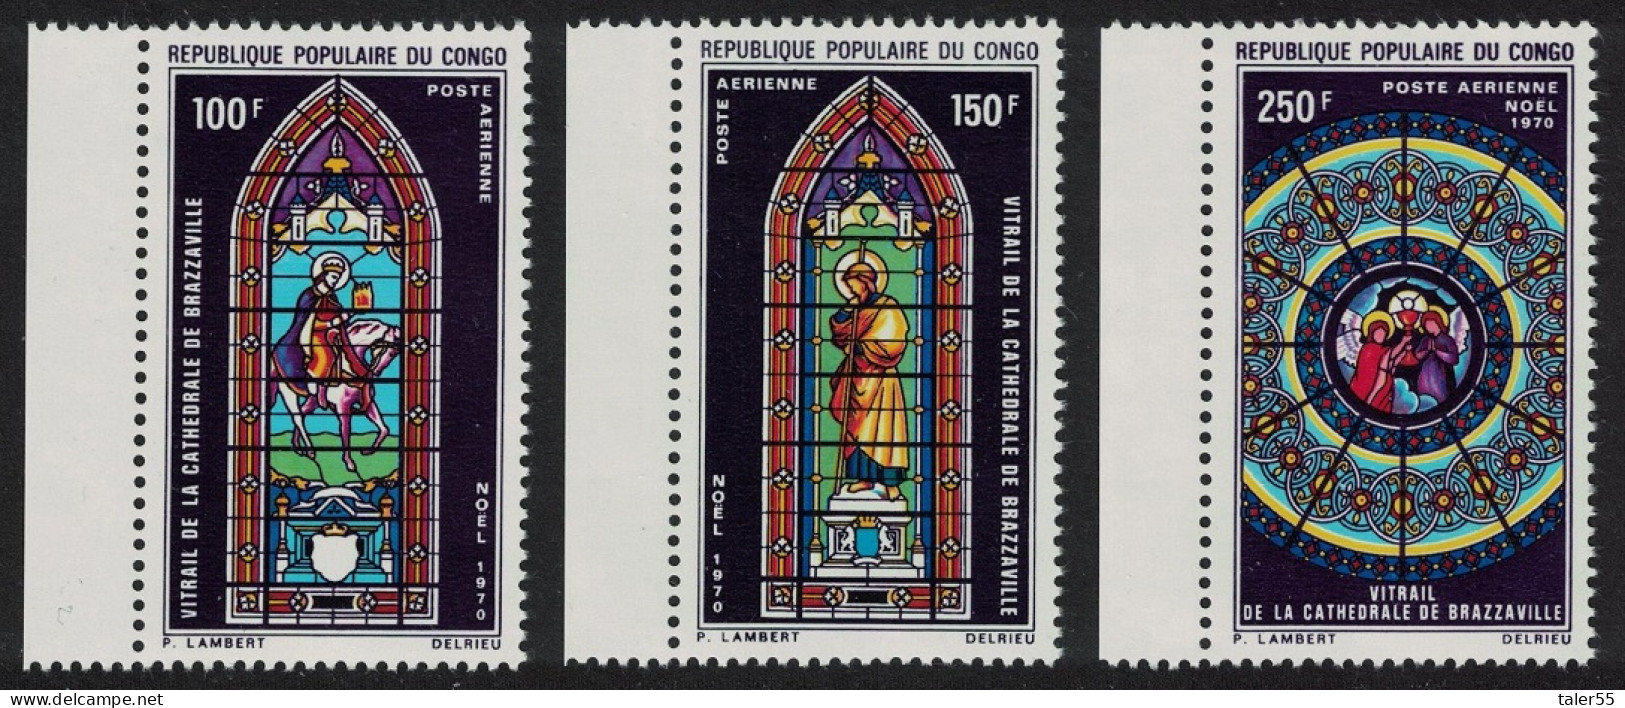 Congo Christmas Stained Glass Windows Brazzaville Cathedral 3v 1970 MNH SG#254-256 - Mint/hinged